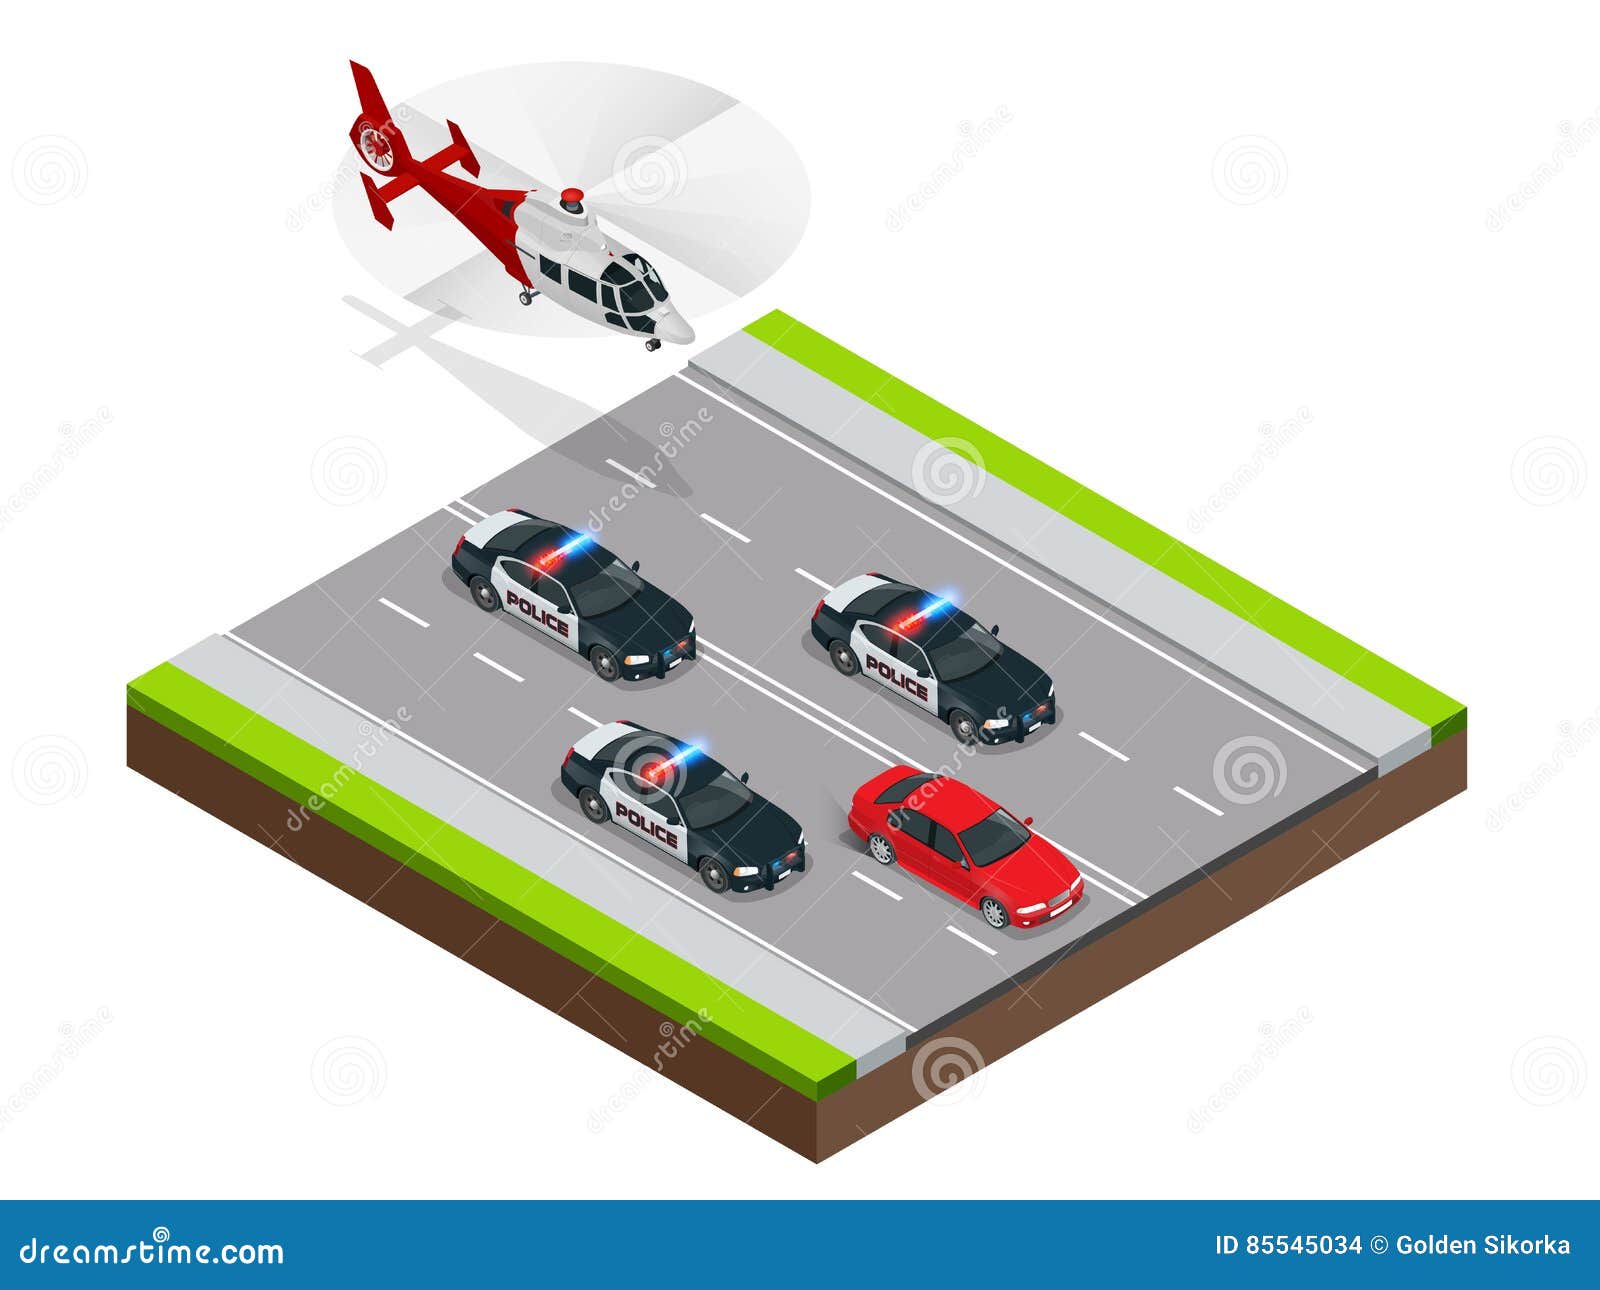 police in pursuit of a criminal with a stolen car or drunk driving, speeding. isometric police chase 